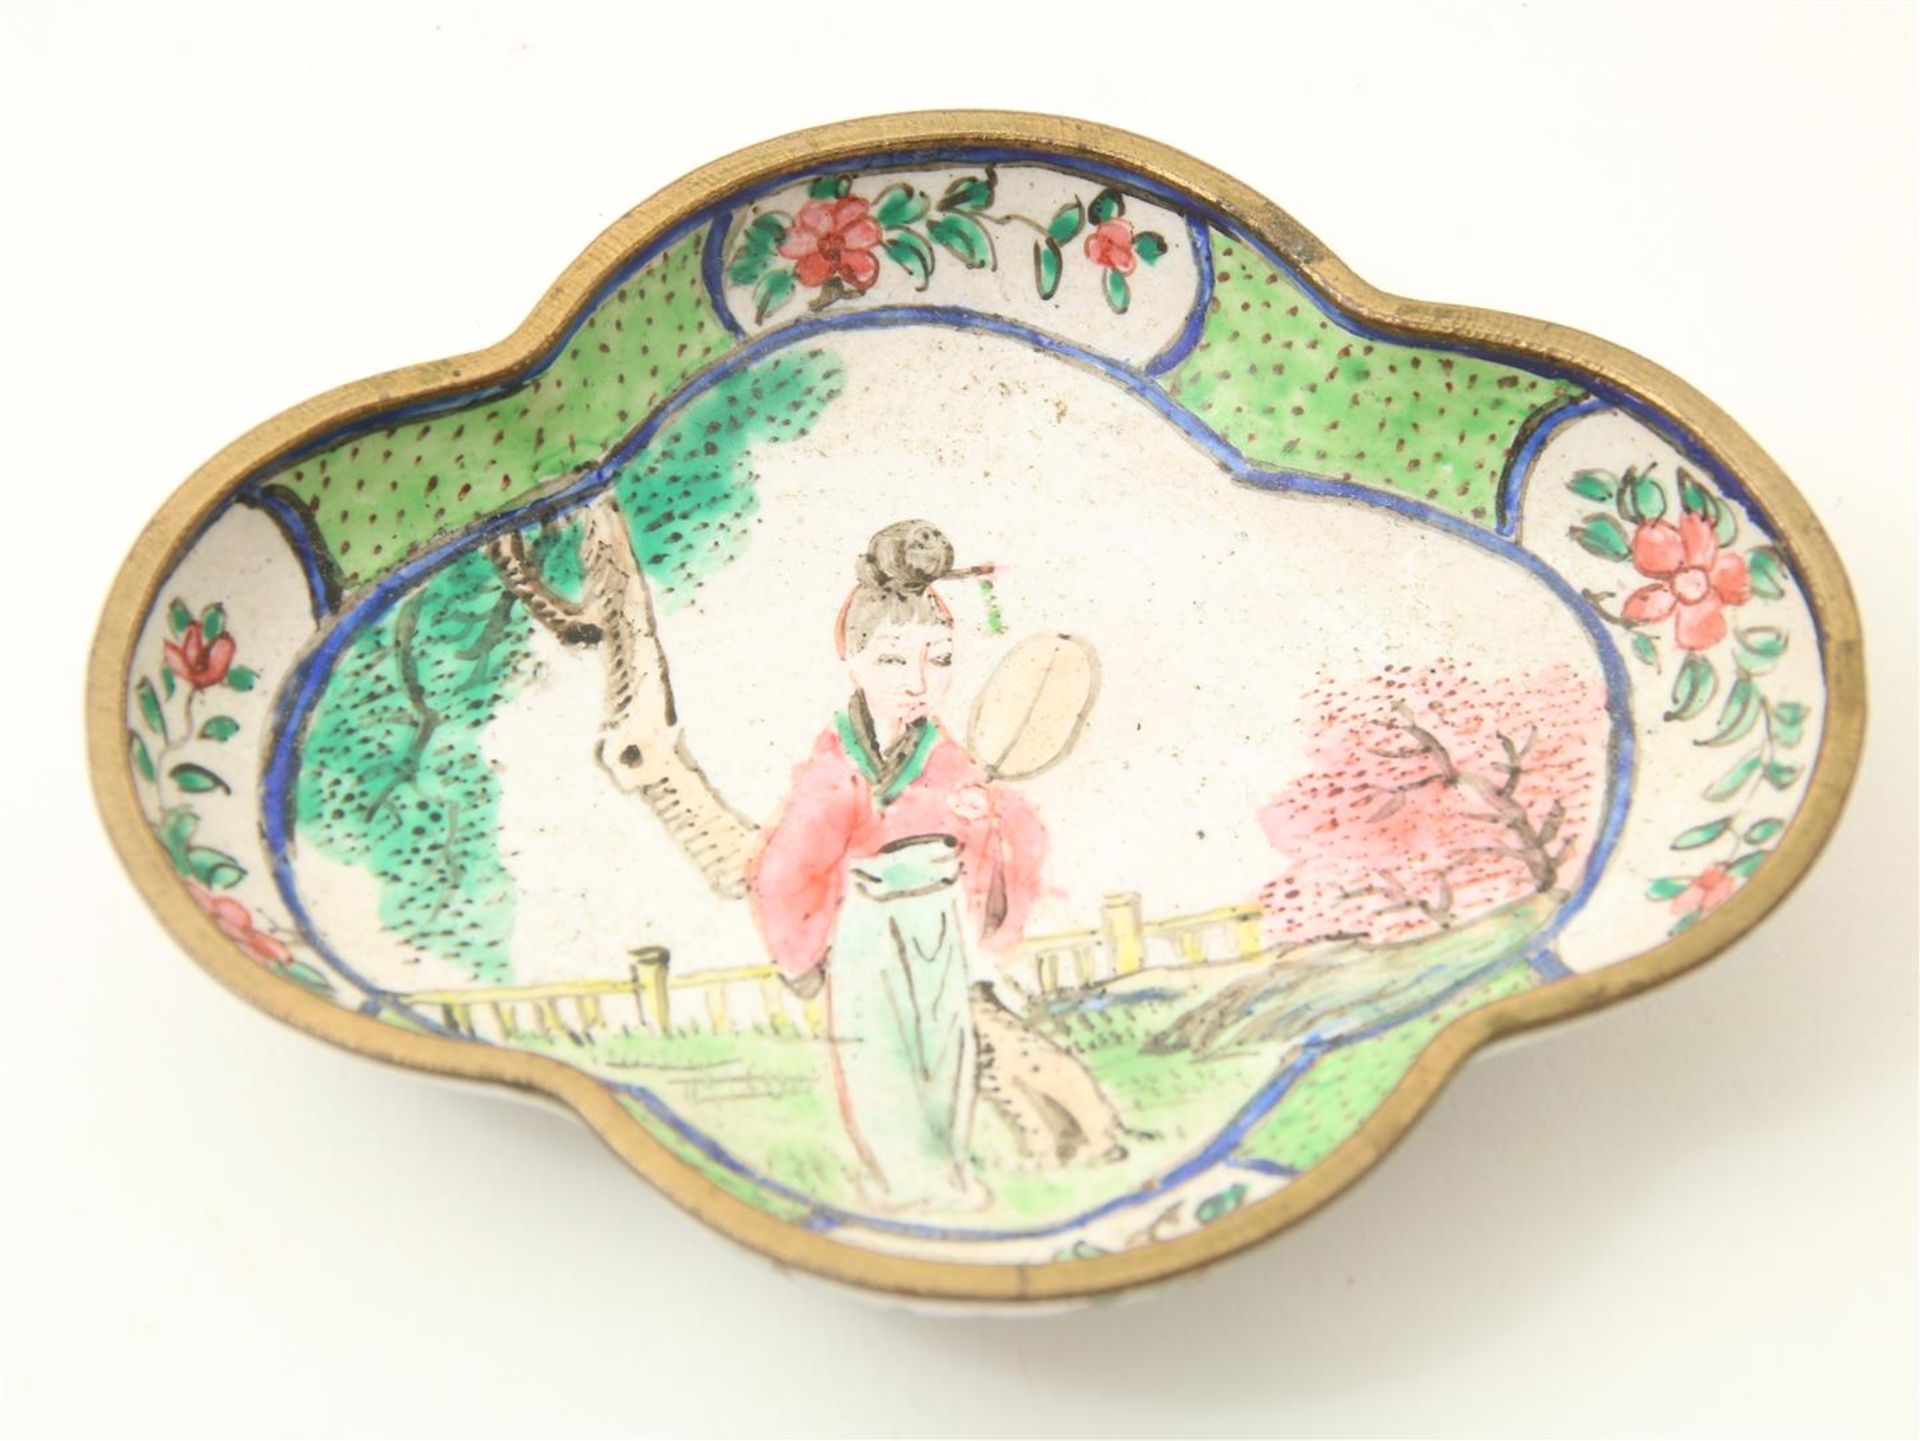 Series of 2 Canton enamel quatrefoil dishes in clover shape with decor of a lady in landscape, - Image 3 of 4